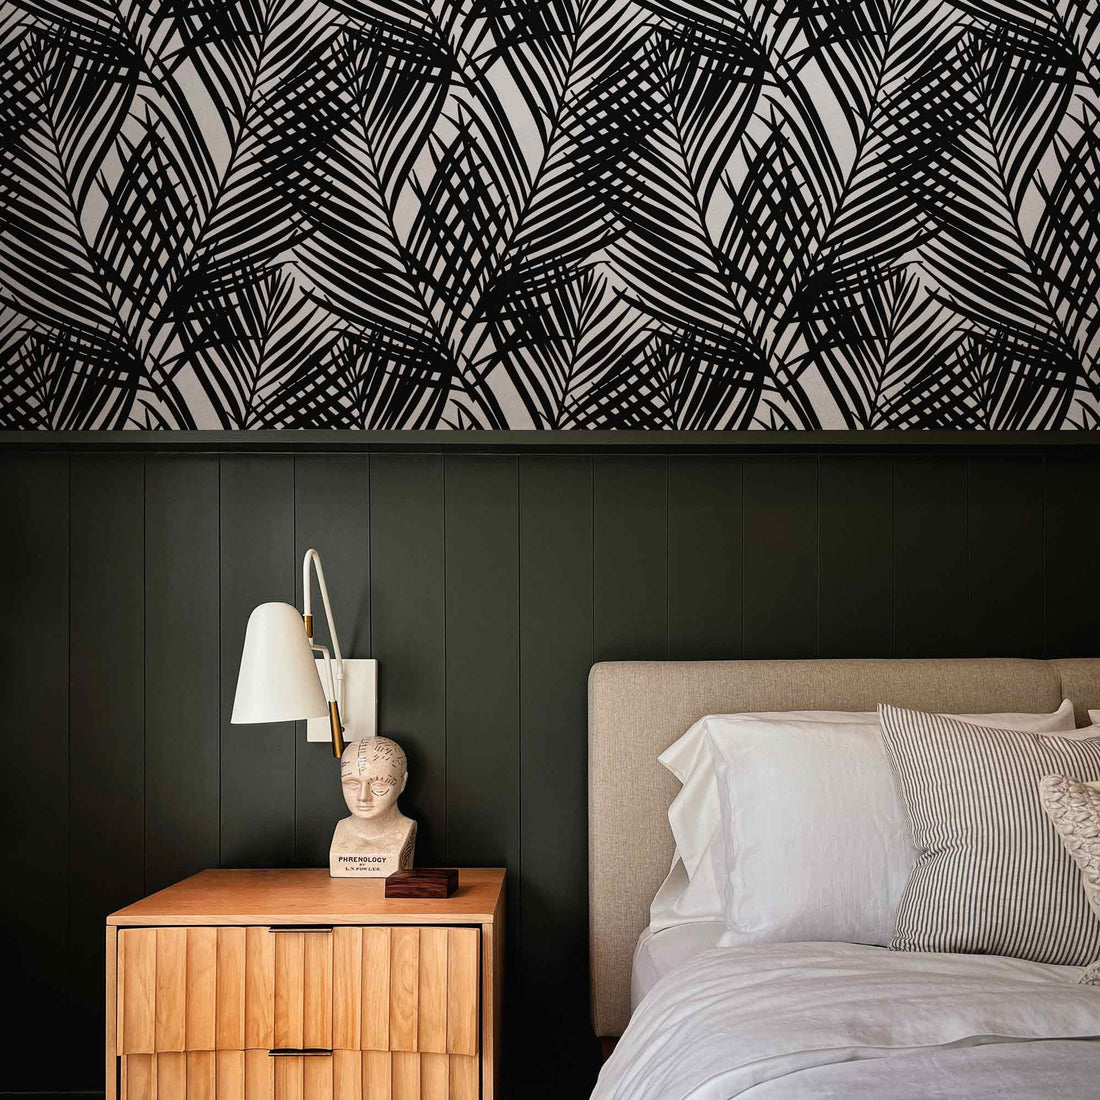 tropical style bedroom interior with black and white palm leaves print wallpaper